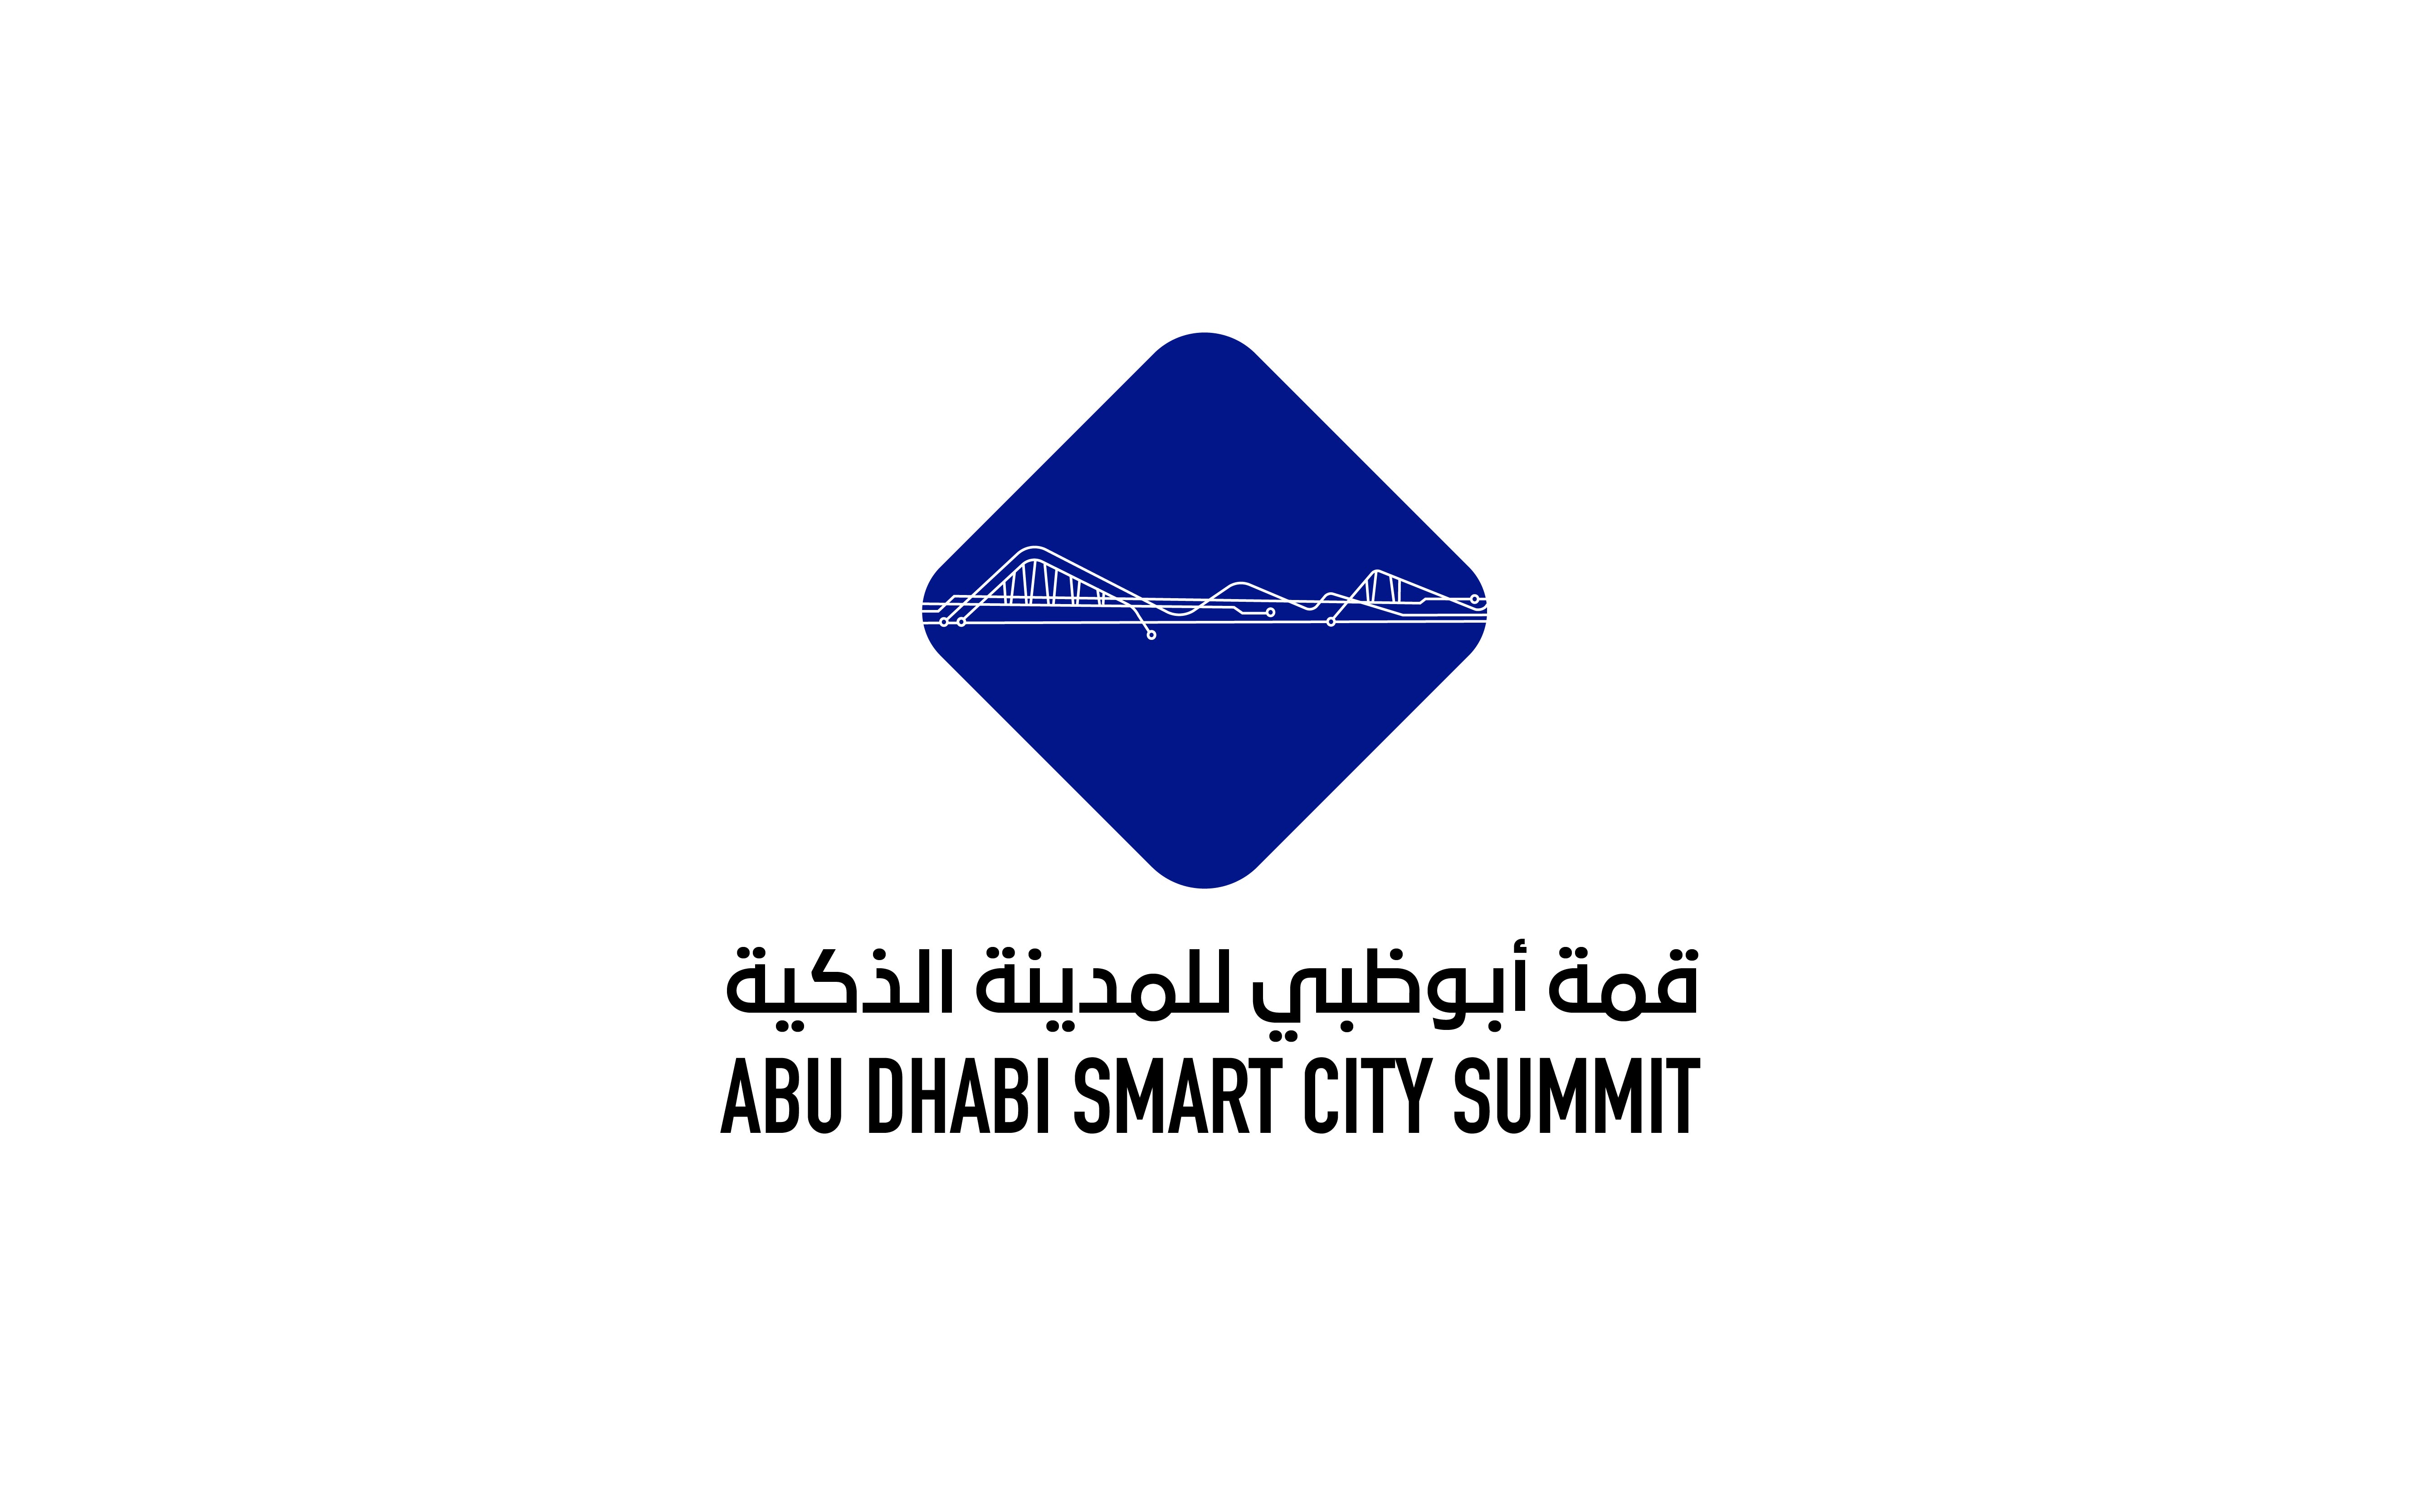 Abu Dhabi Smart City Summit Set To Welcome More Than 400 Experts And 25 Government And Non-Government Stakeholders